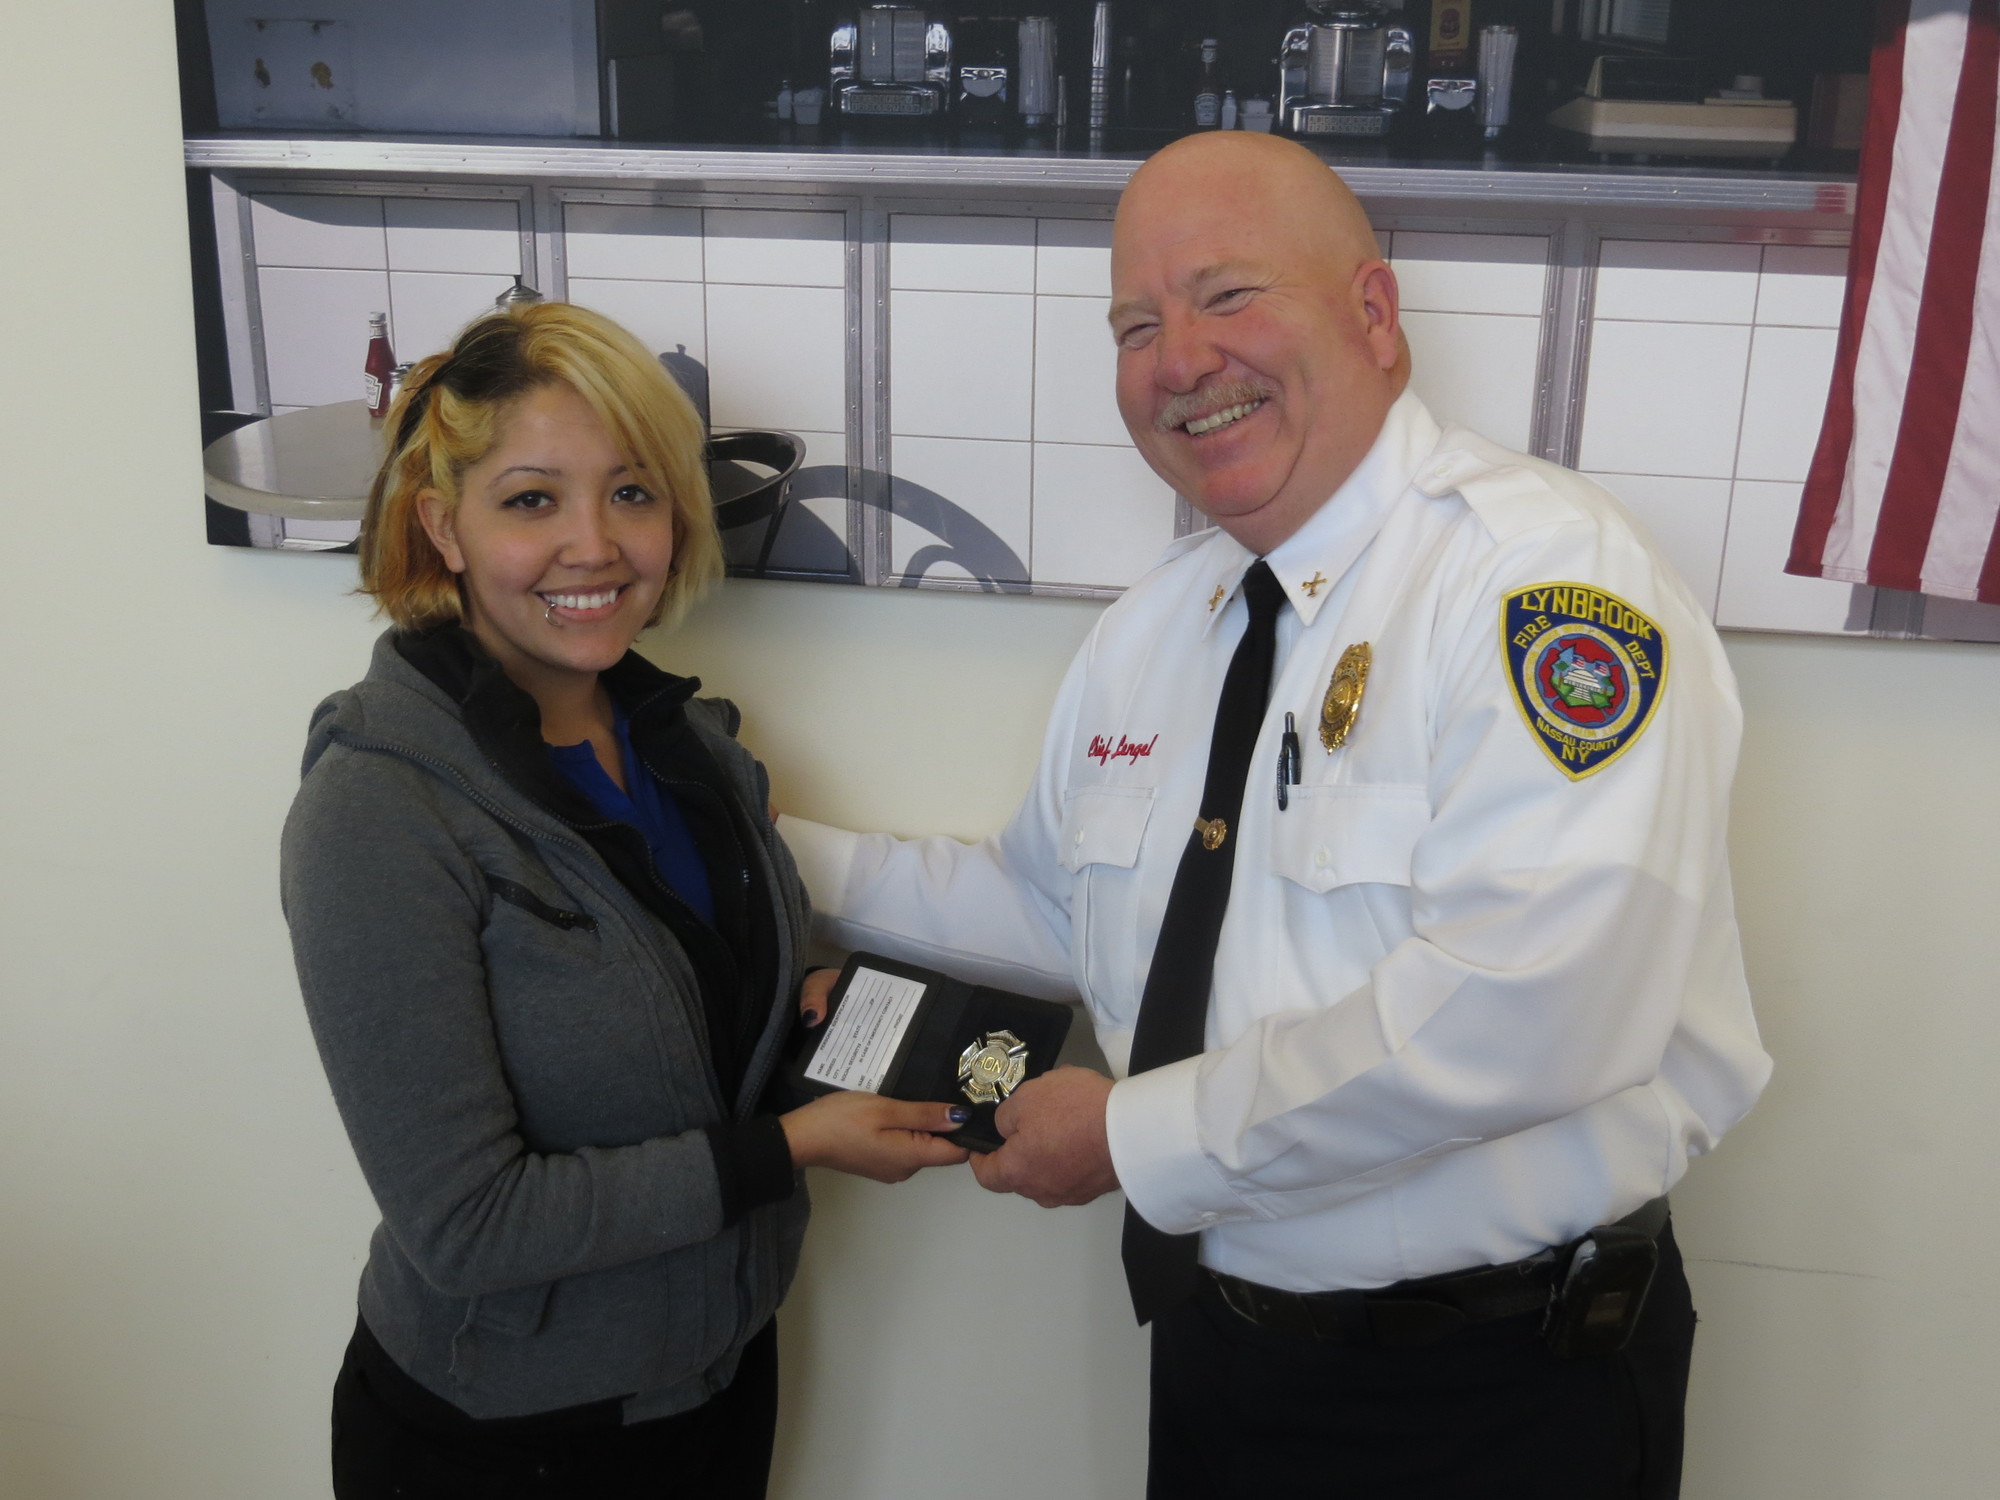 Chief Lengel presented Marcos Dandrea’s honorary Lynbrook Fire Department badge to his wife, Victoria.